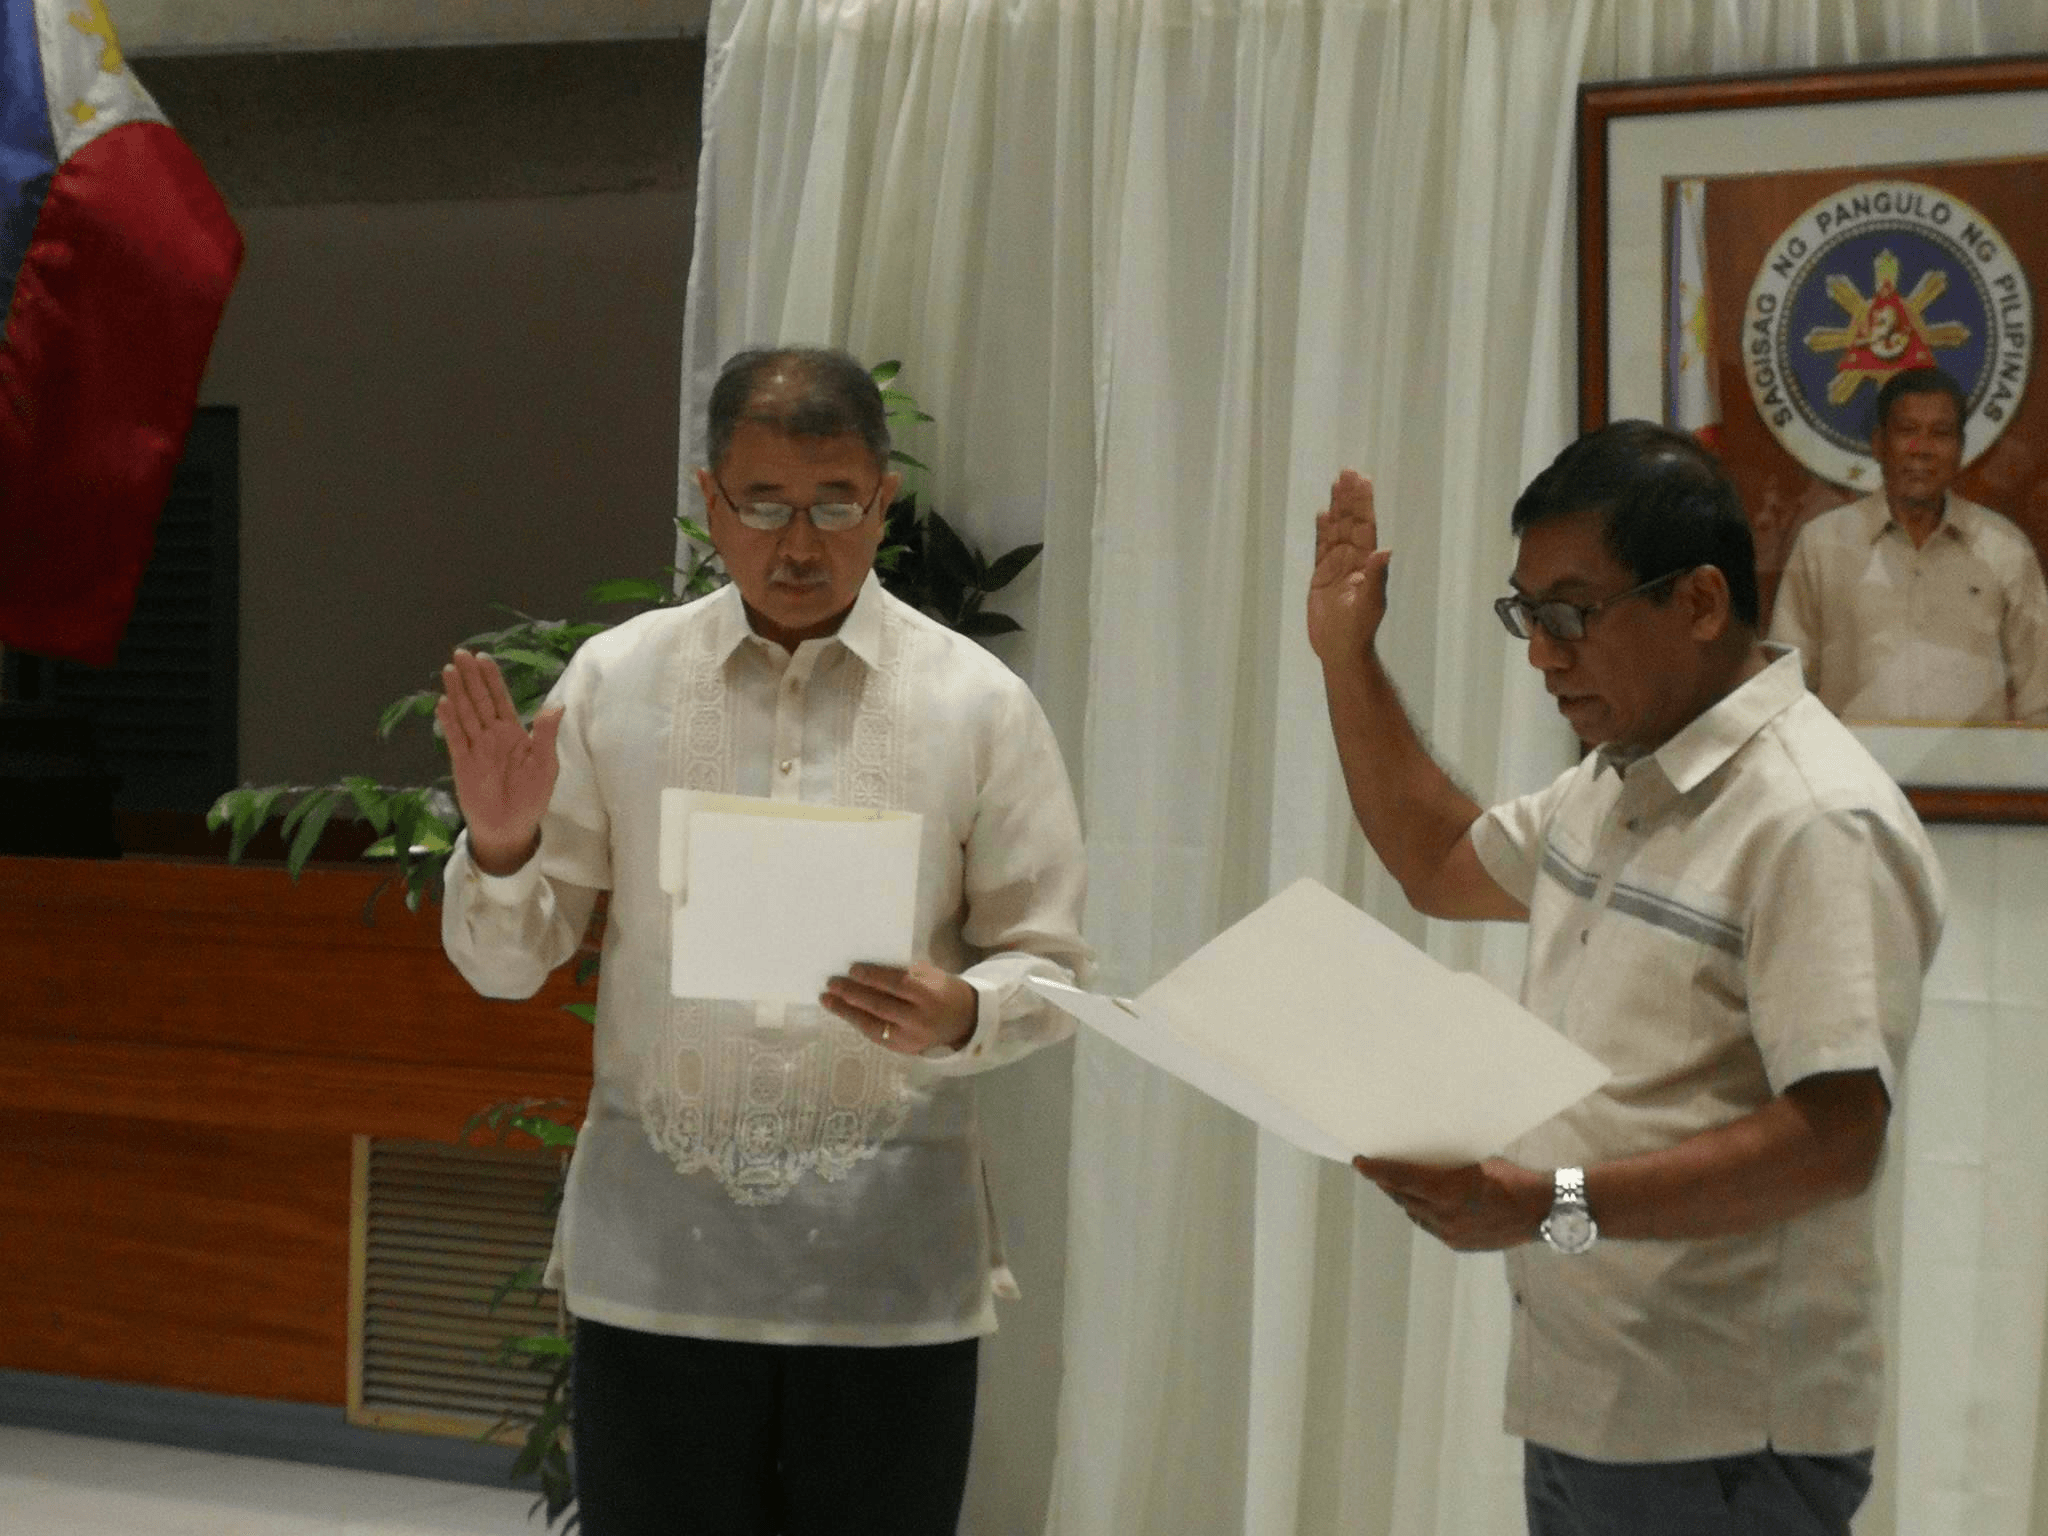 Phivolcs chief Solidum appointed as DOST usec